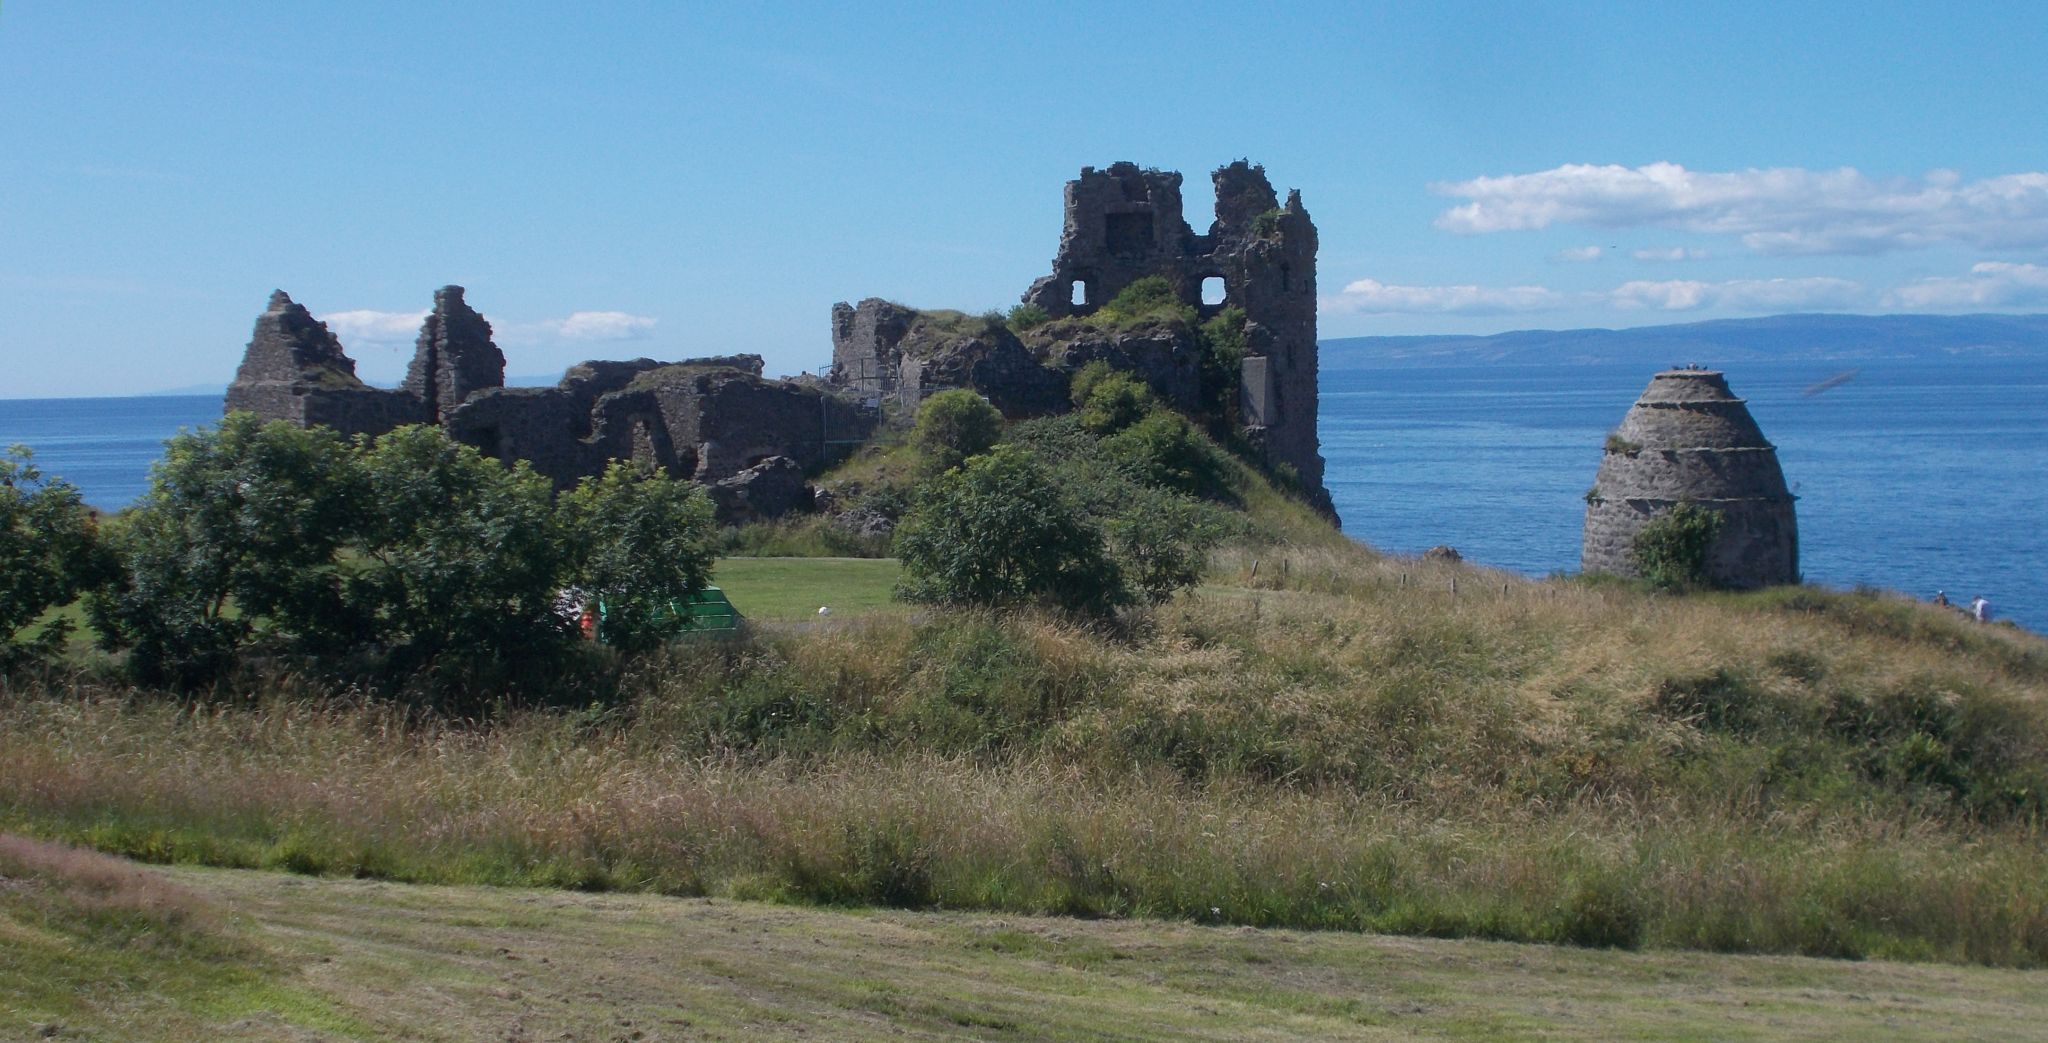 The castle at Dunure